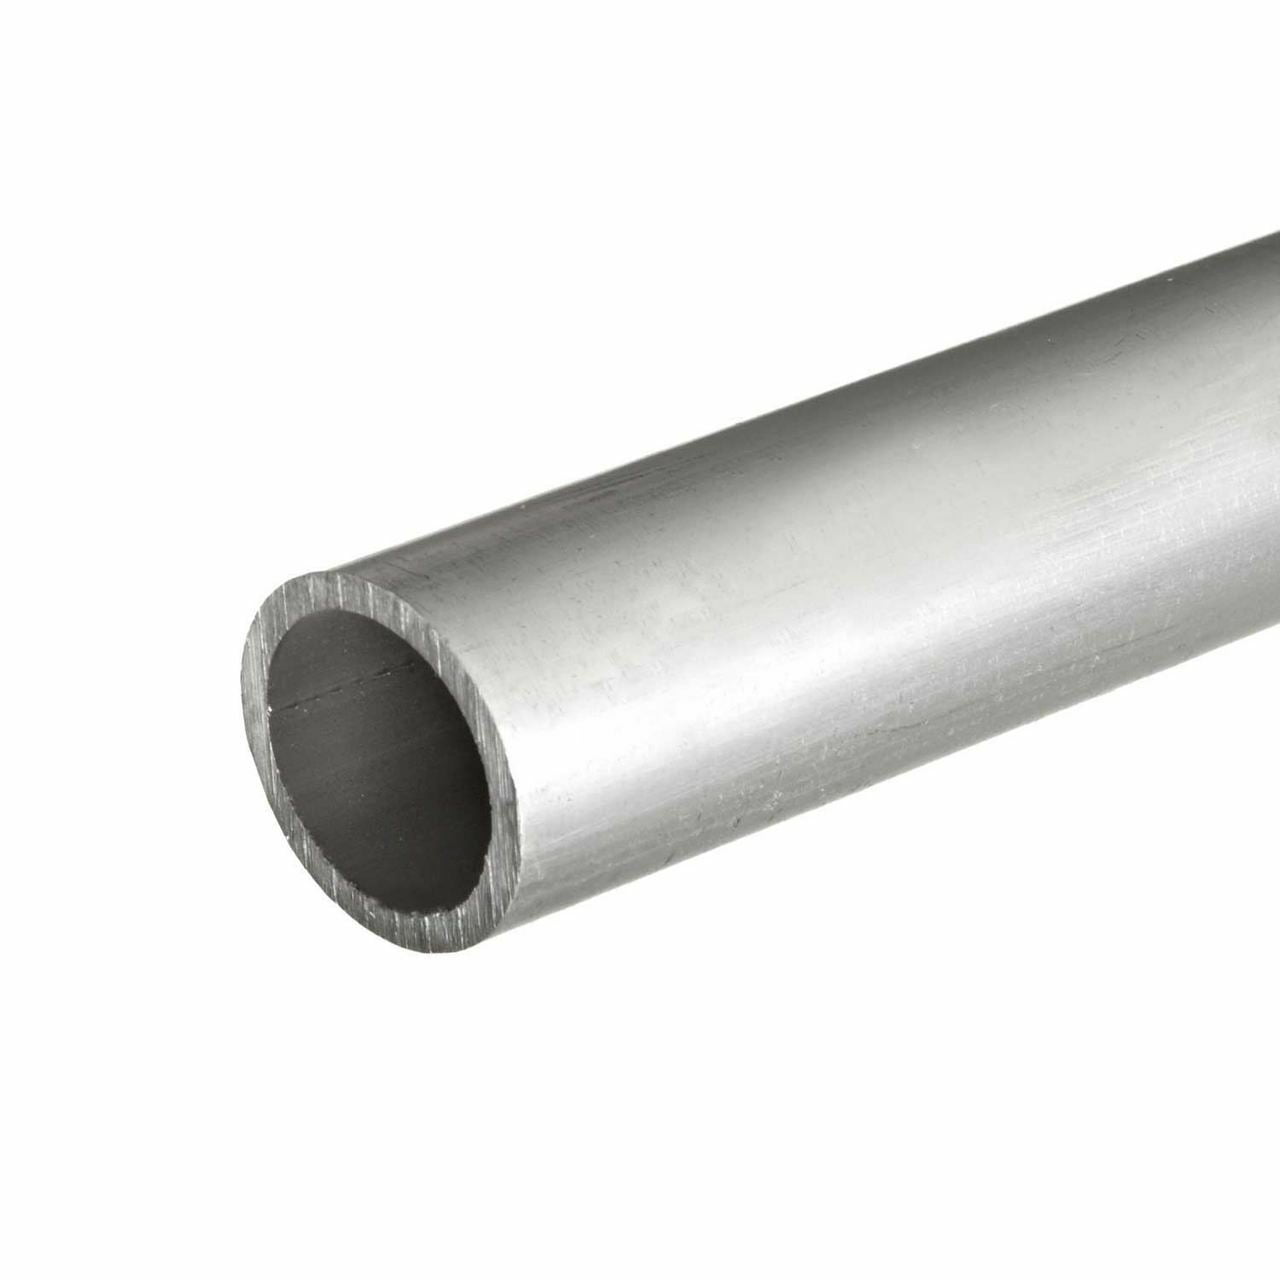 1-1/2 inch NPS x 36 inches Online Metal Supply 6063-T52 Aluminum Pipe Schedule 40 1.9 OD 